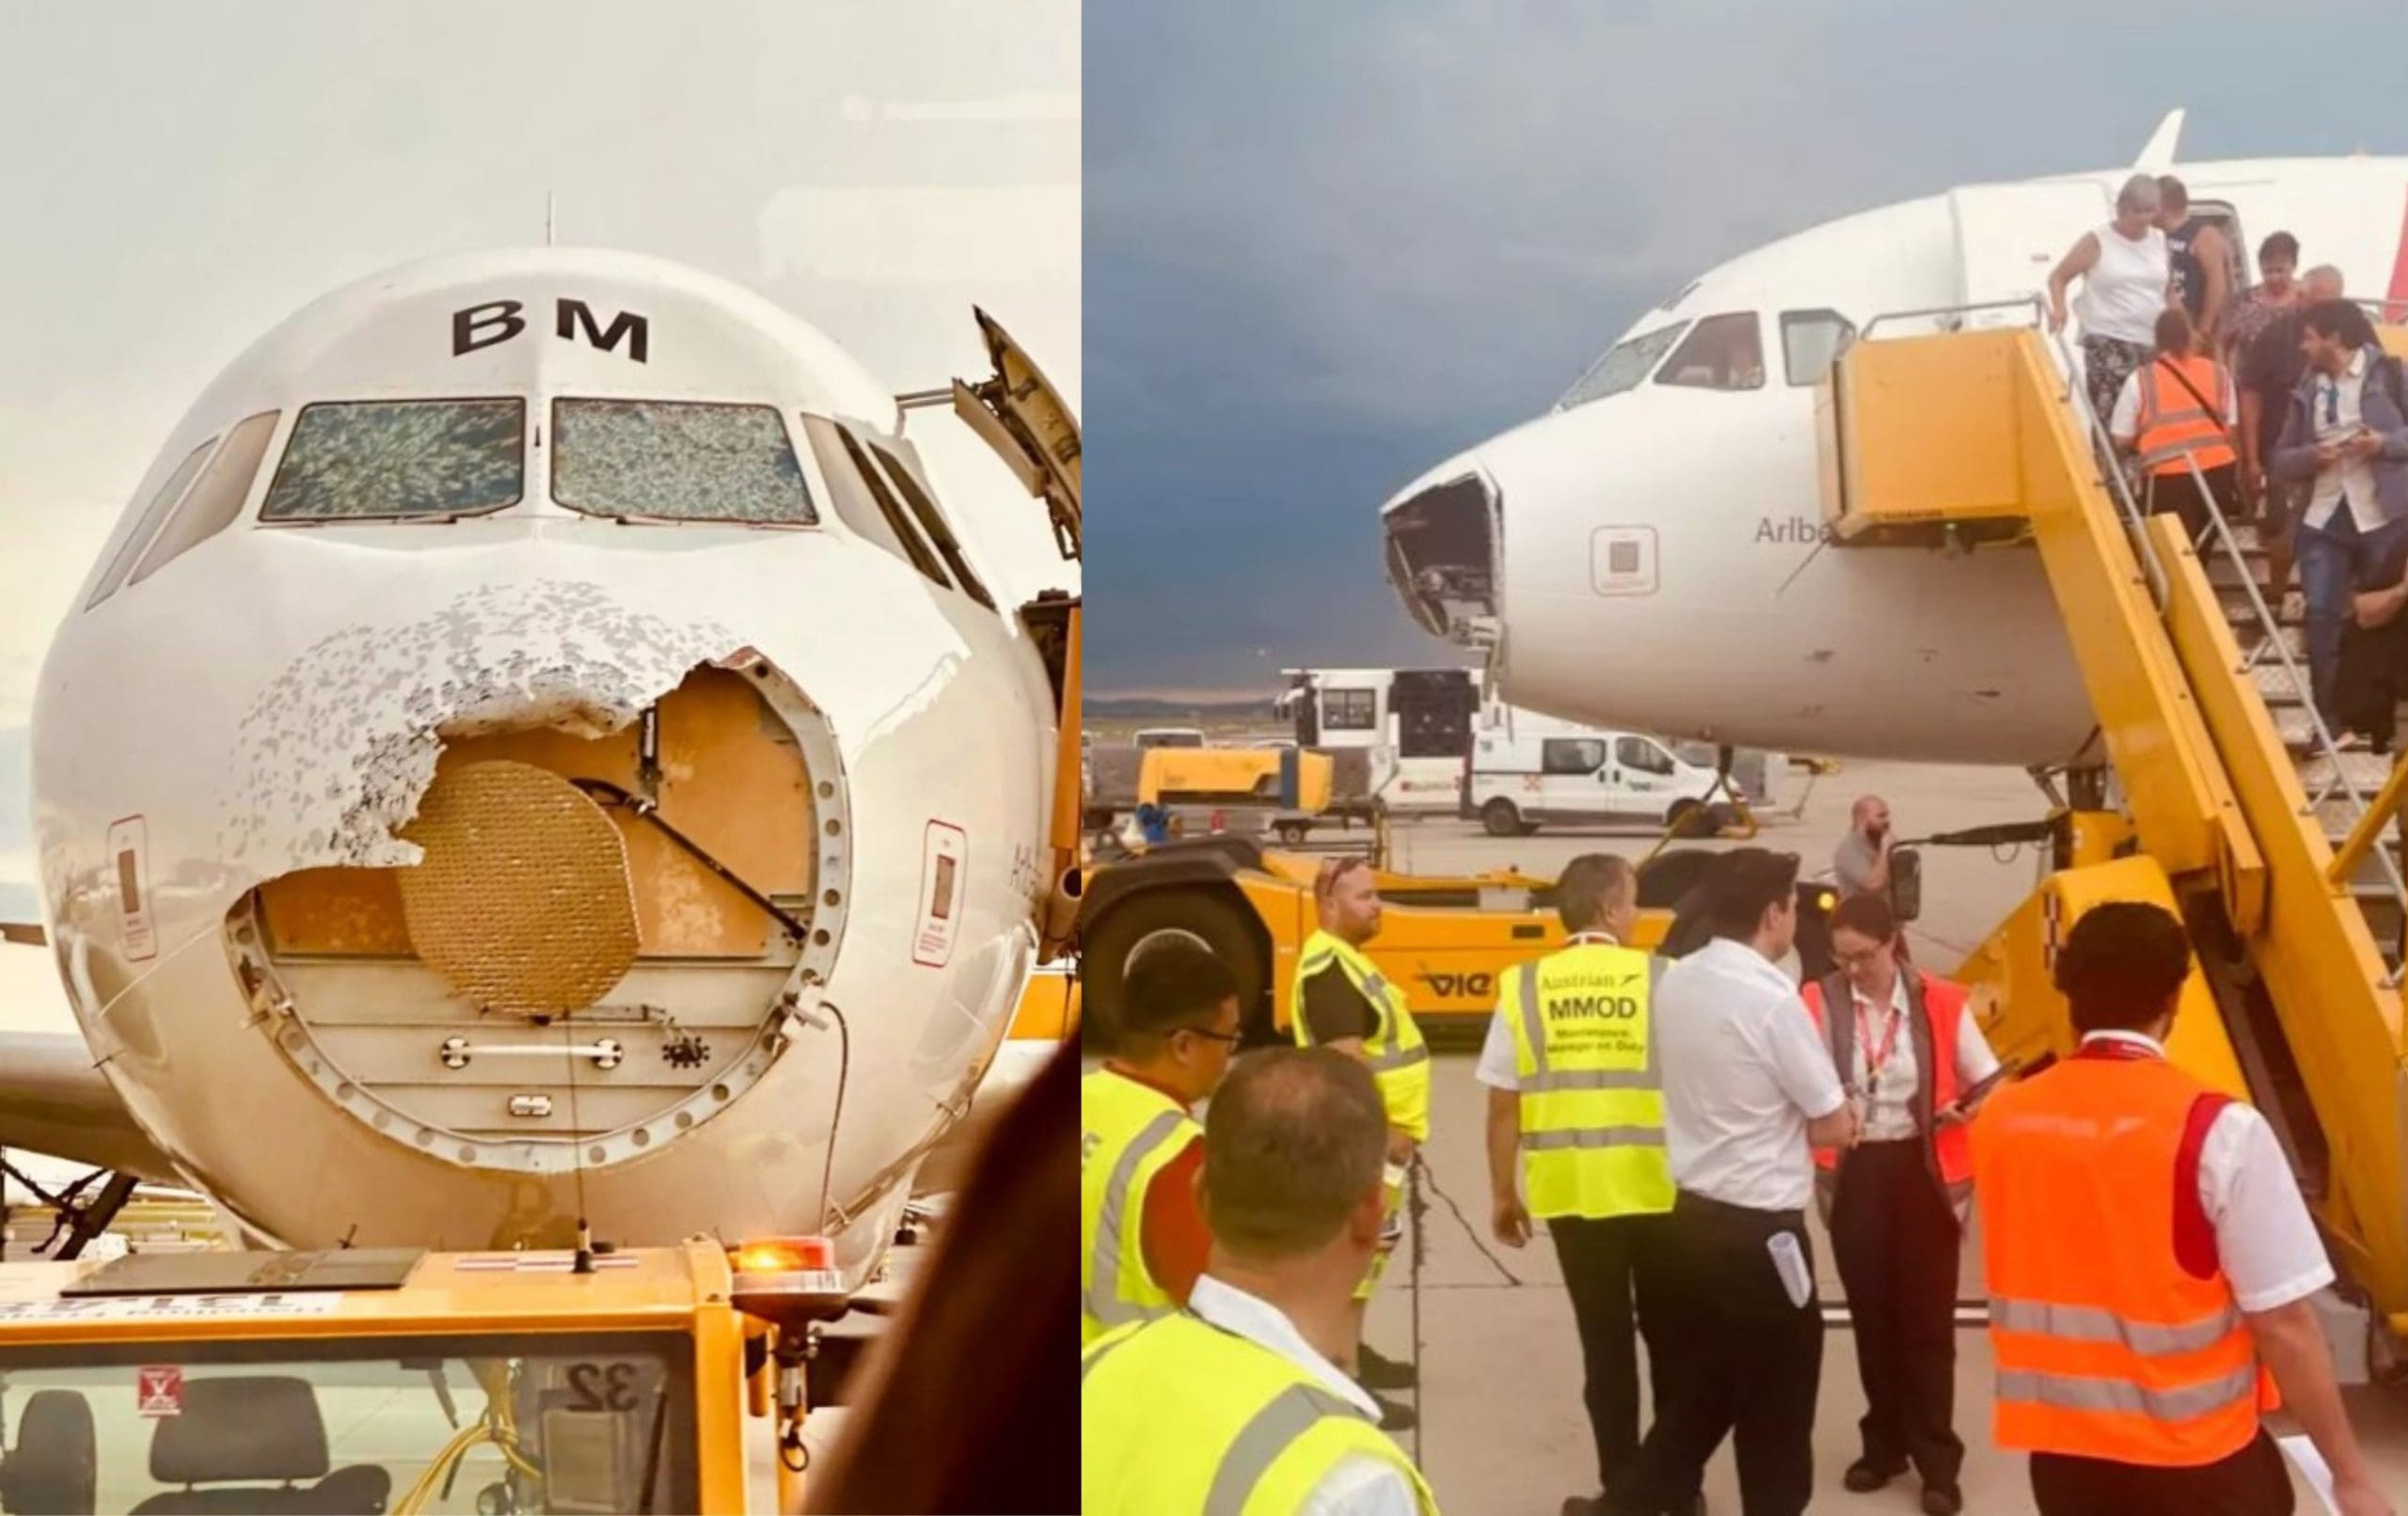 Pilots Forced to Land Plane ‘Blind’ After Hail Storm Breaks Windshield and Rips Off Nose of Plane